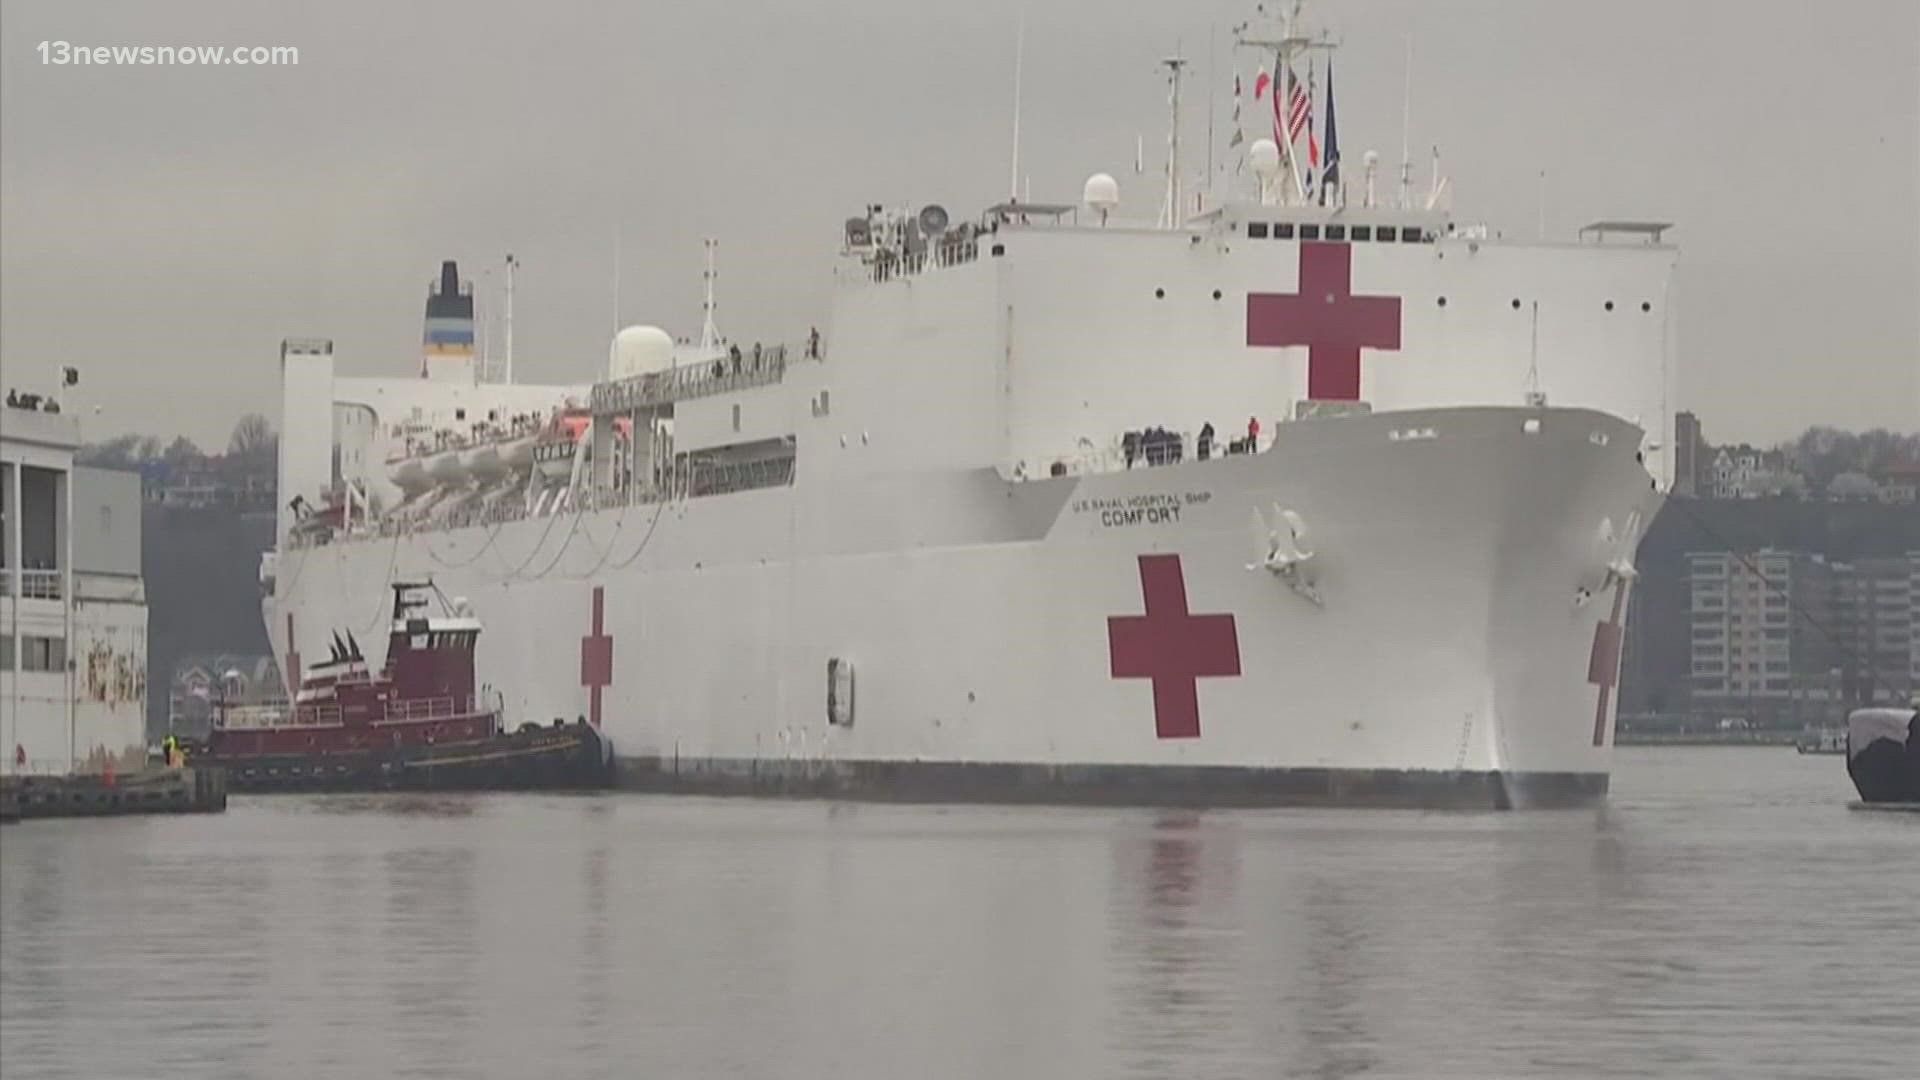 Norfolk-based USNS Comfort was deployed to help treat patients in the early days of the pandemic. Mississippi health officials hope it can be deployed again.